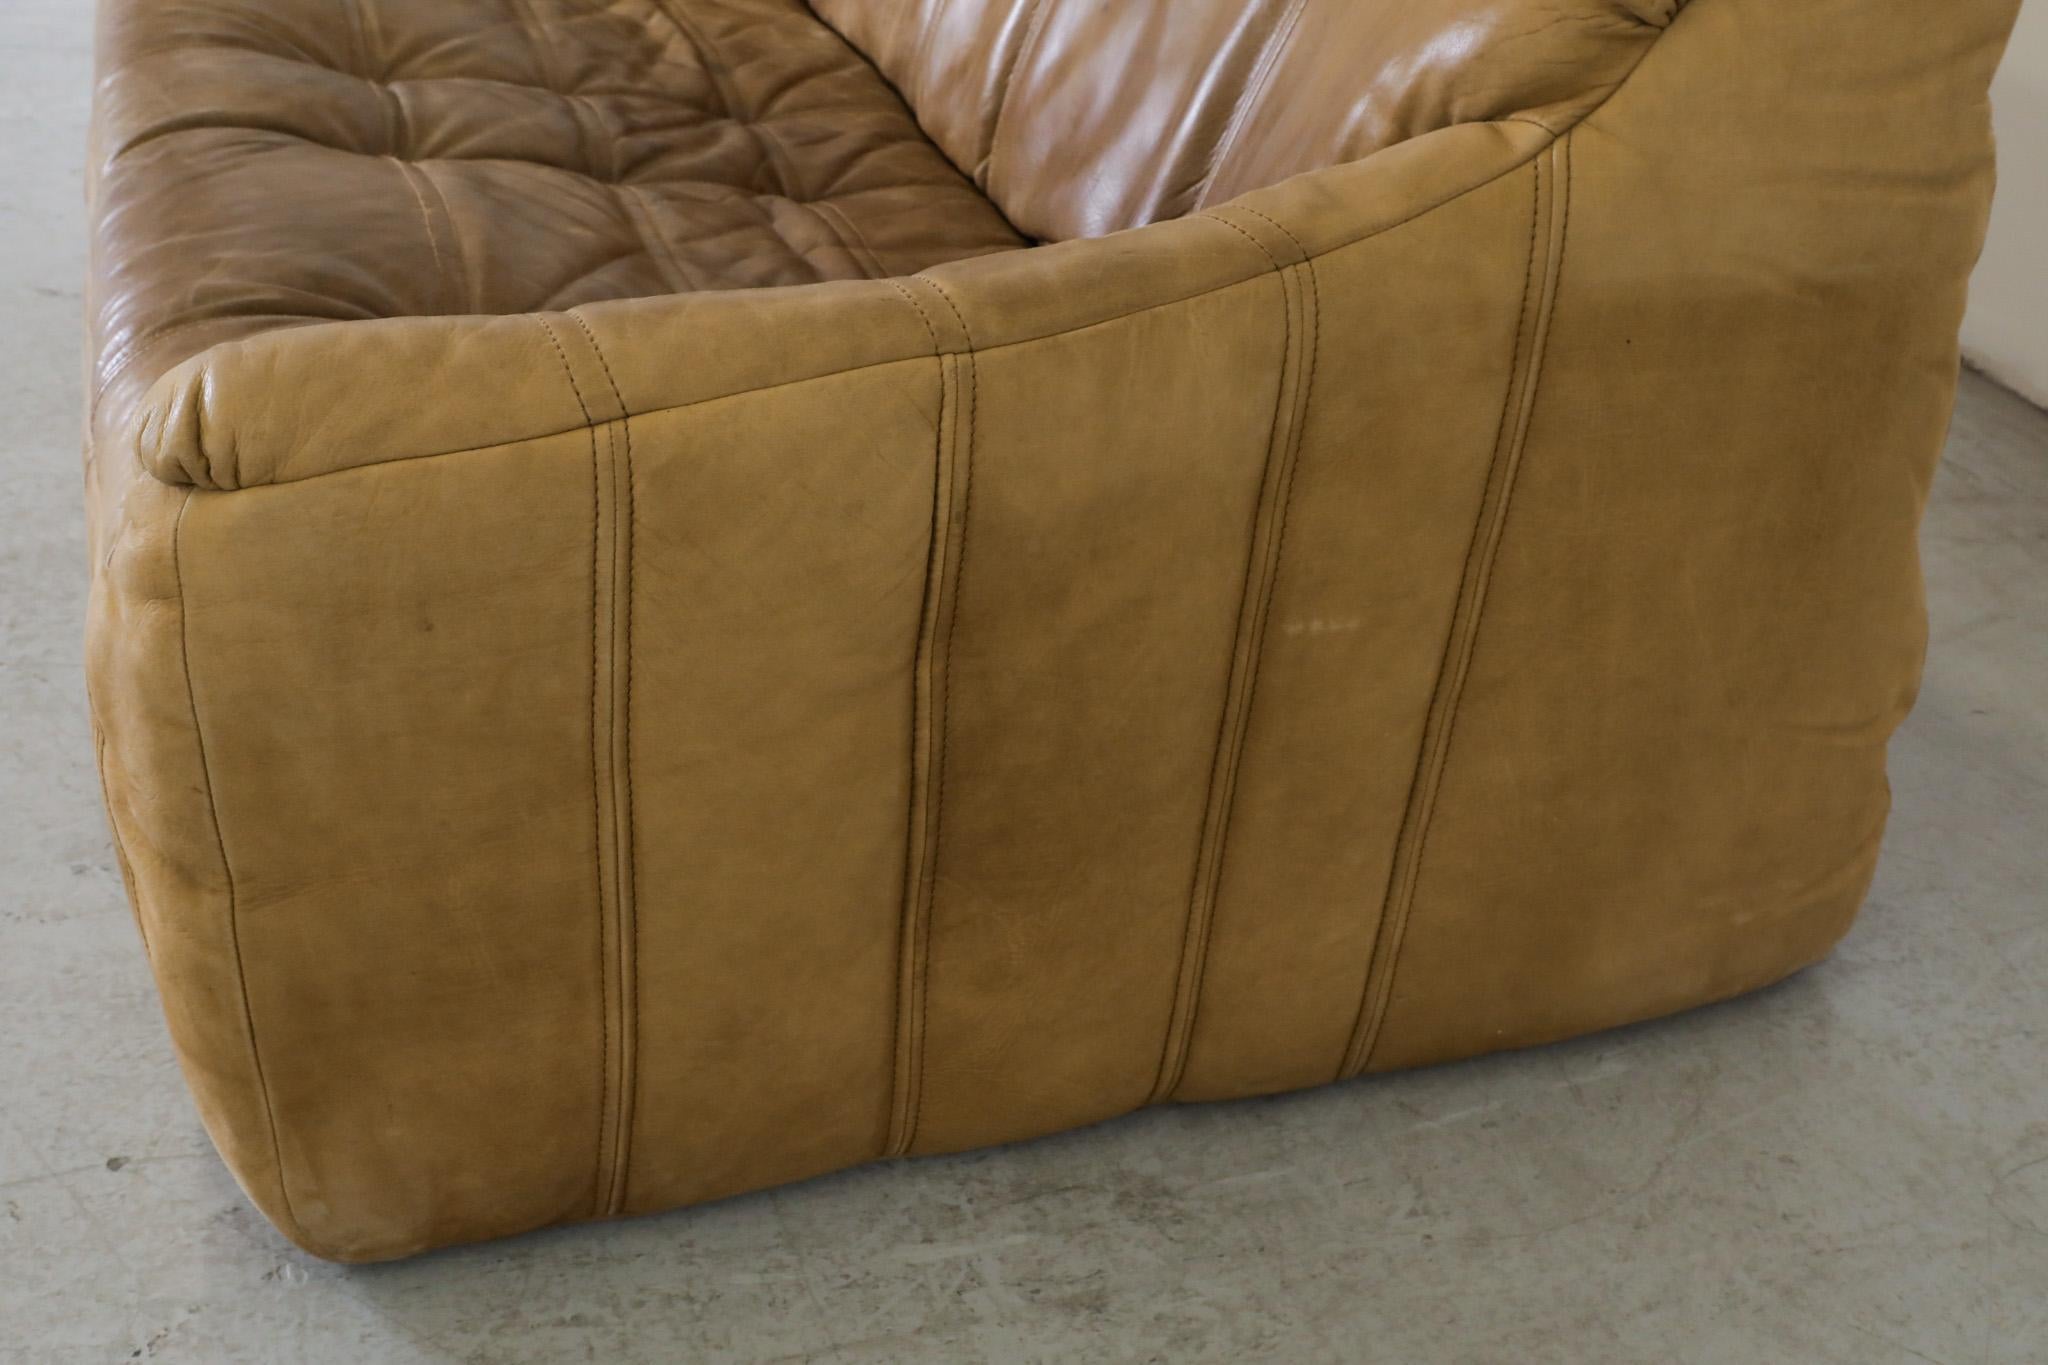 Rolf Benz Soft Form Buck Leather Loveseats, 1970s For Sale 13